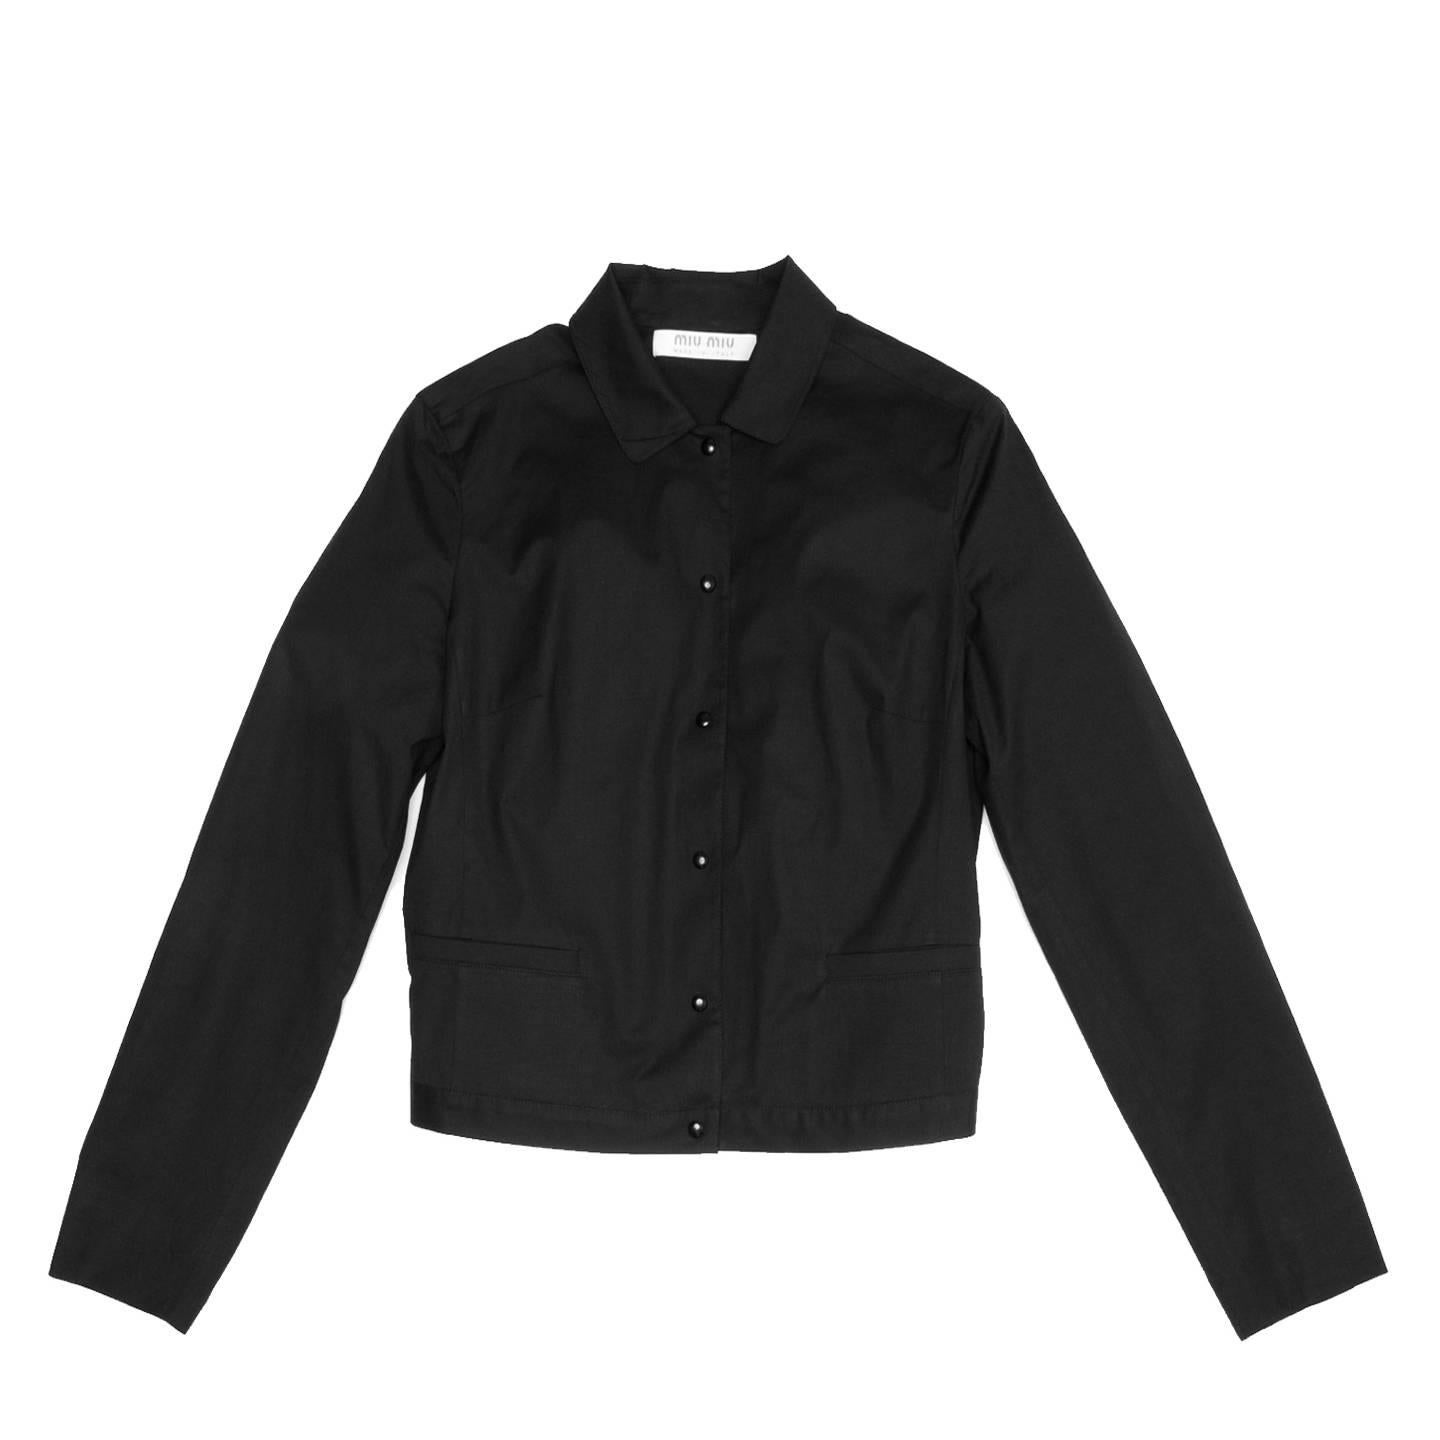 Miu Miu black stretch cotton hip length shirt jacket with tight fit and peter pan collar. Center front and cuffs fasten with black metal snap buttons and two small slit pockets sit at waist. Made in Italy.

Size  44 Italian sizing

Condition 